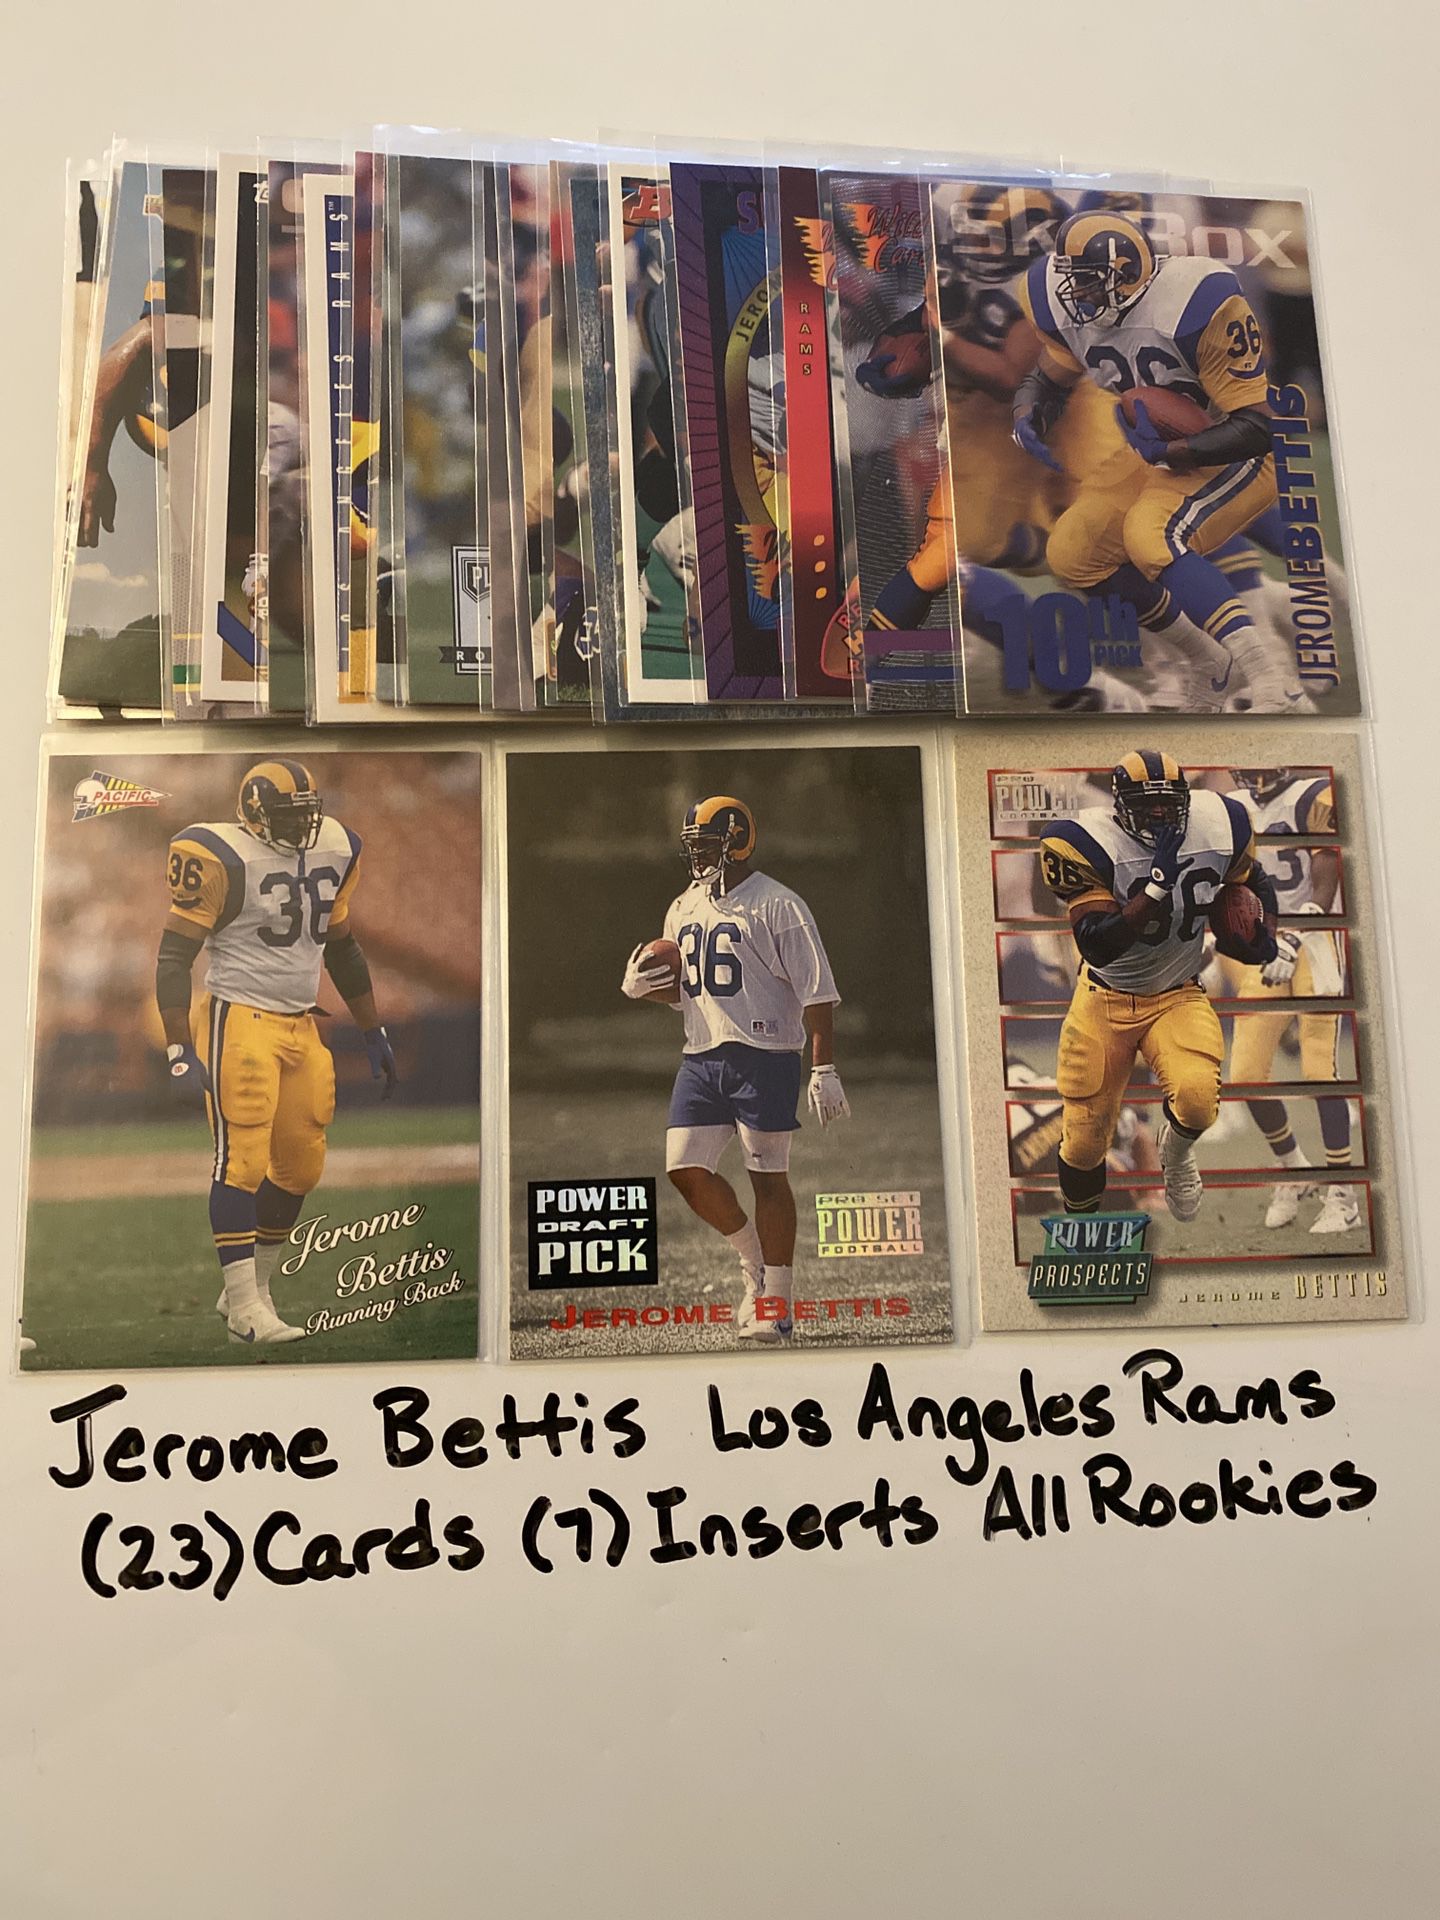 Jerome Bettis Los Angeles Rams Pittsburgh Steelers Hall of Fame RB (23) Card Lot. All Rookie Cards.